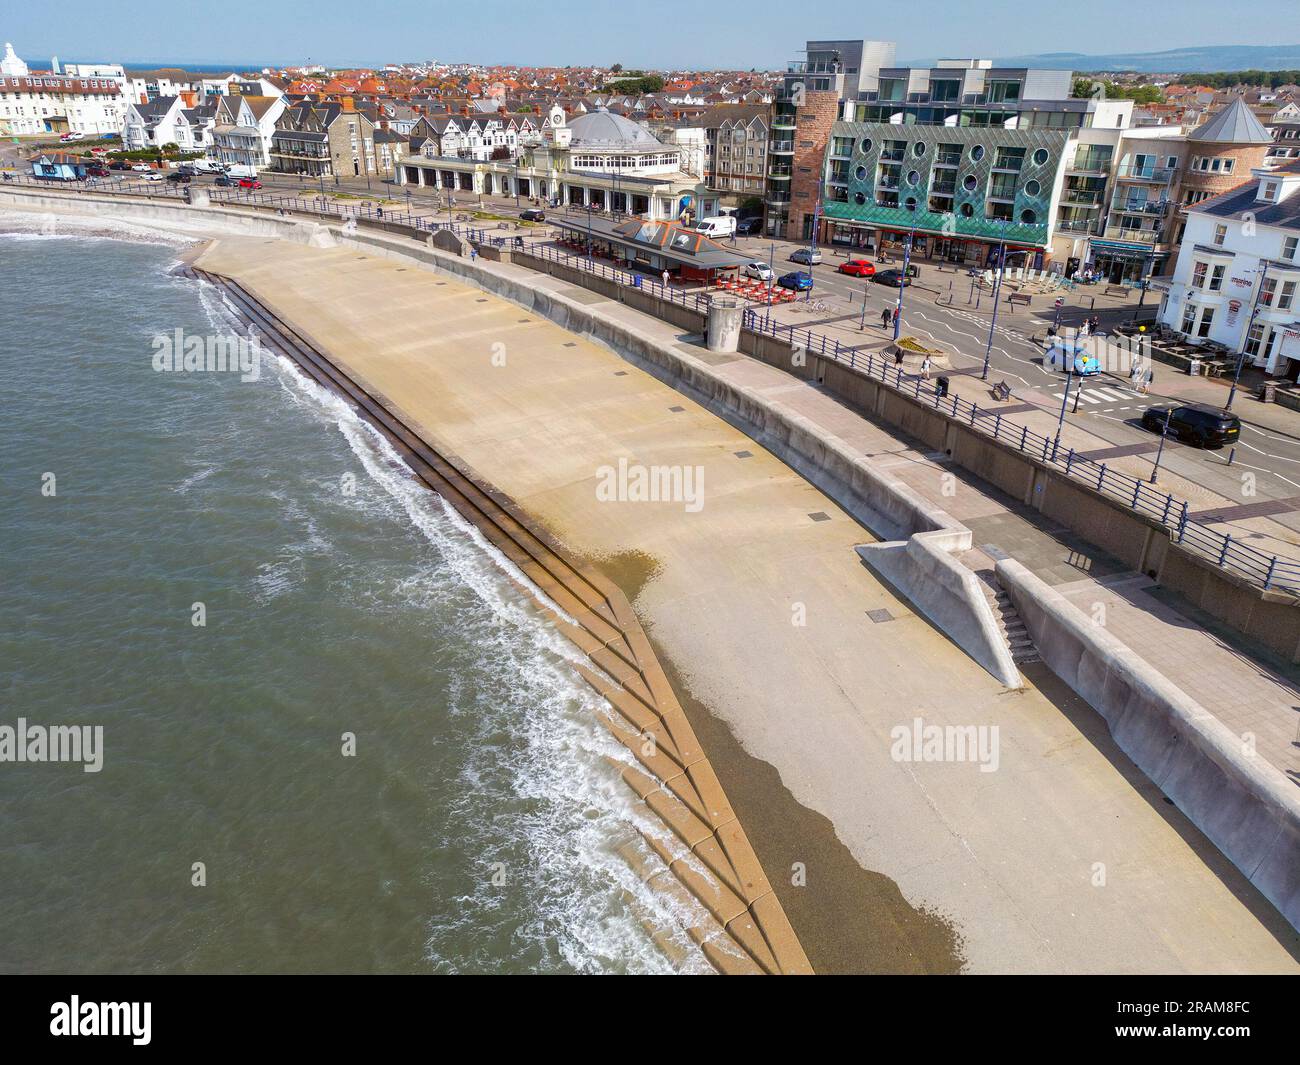 Porthcawl, Wales - 9 June 2023: Aerial view of the concrete platform in front of the promenade of the town of Porthcawl in south Wales. Stock Photo